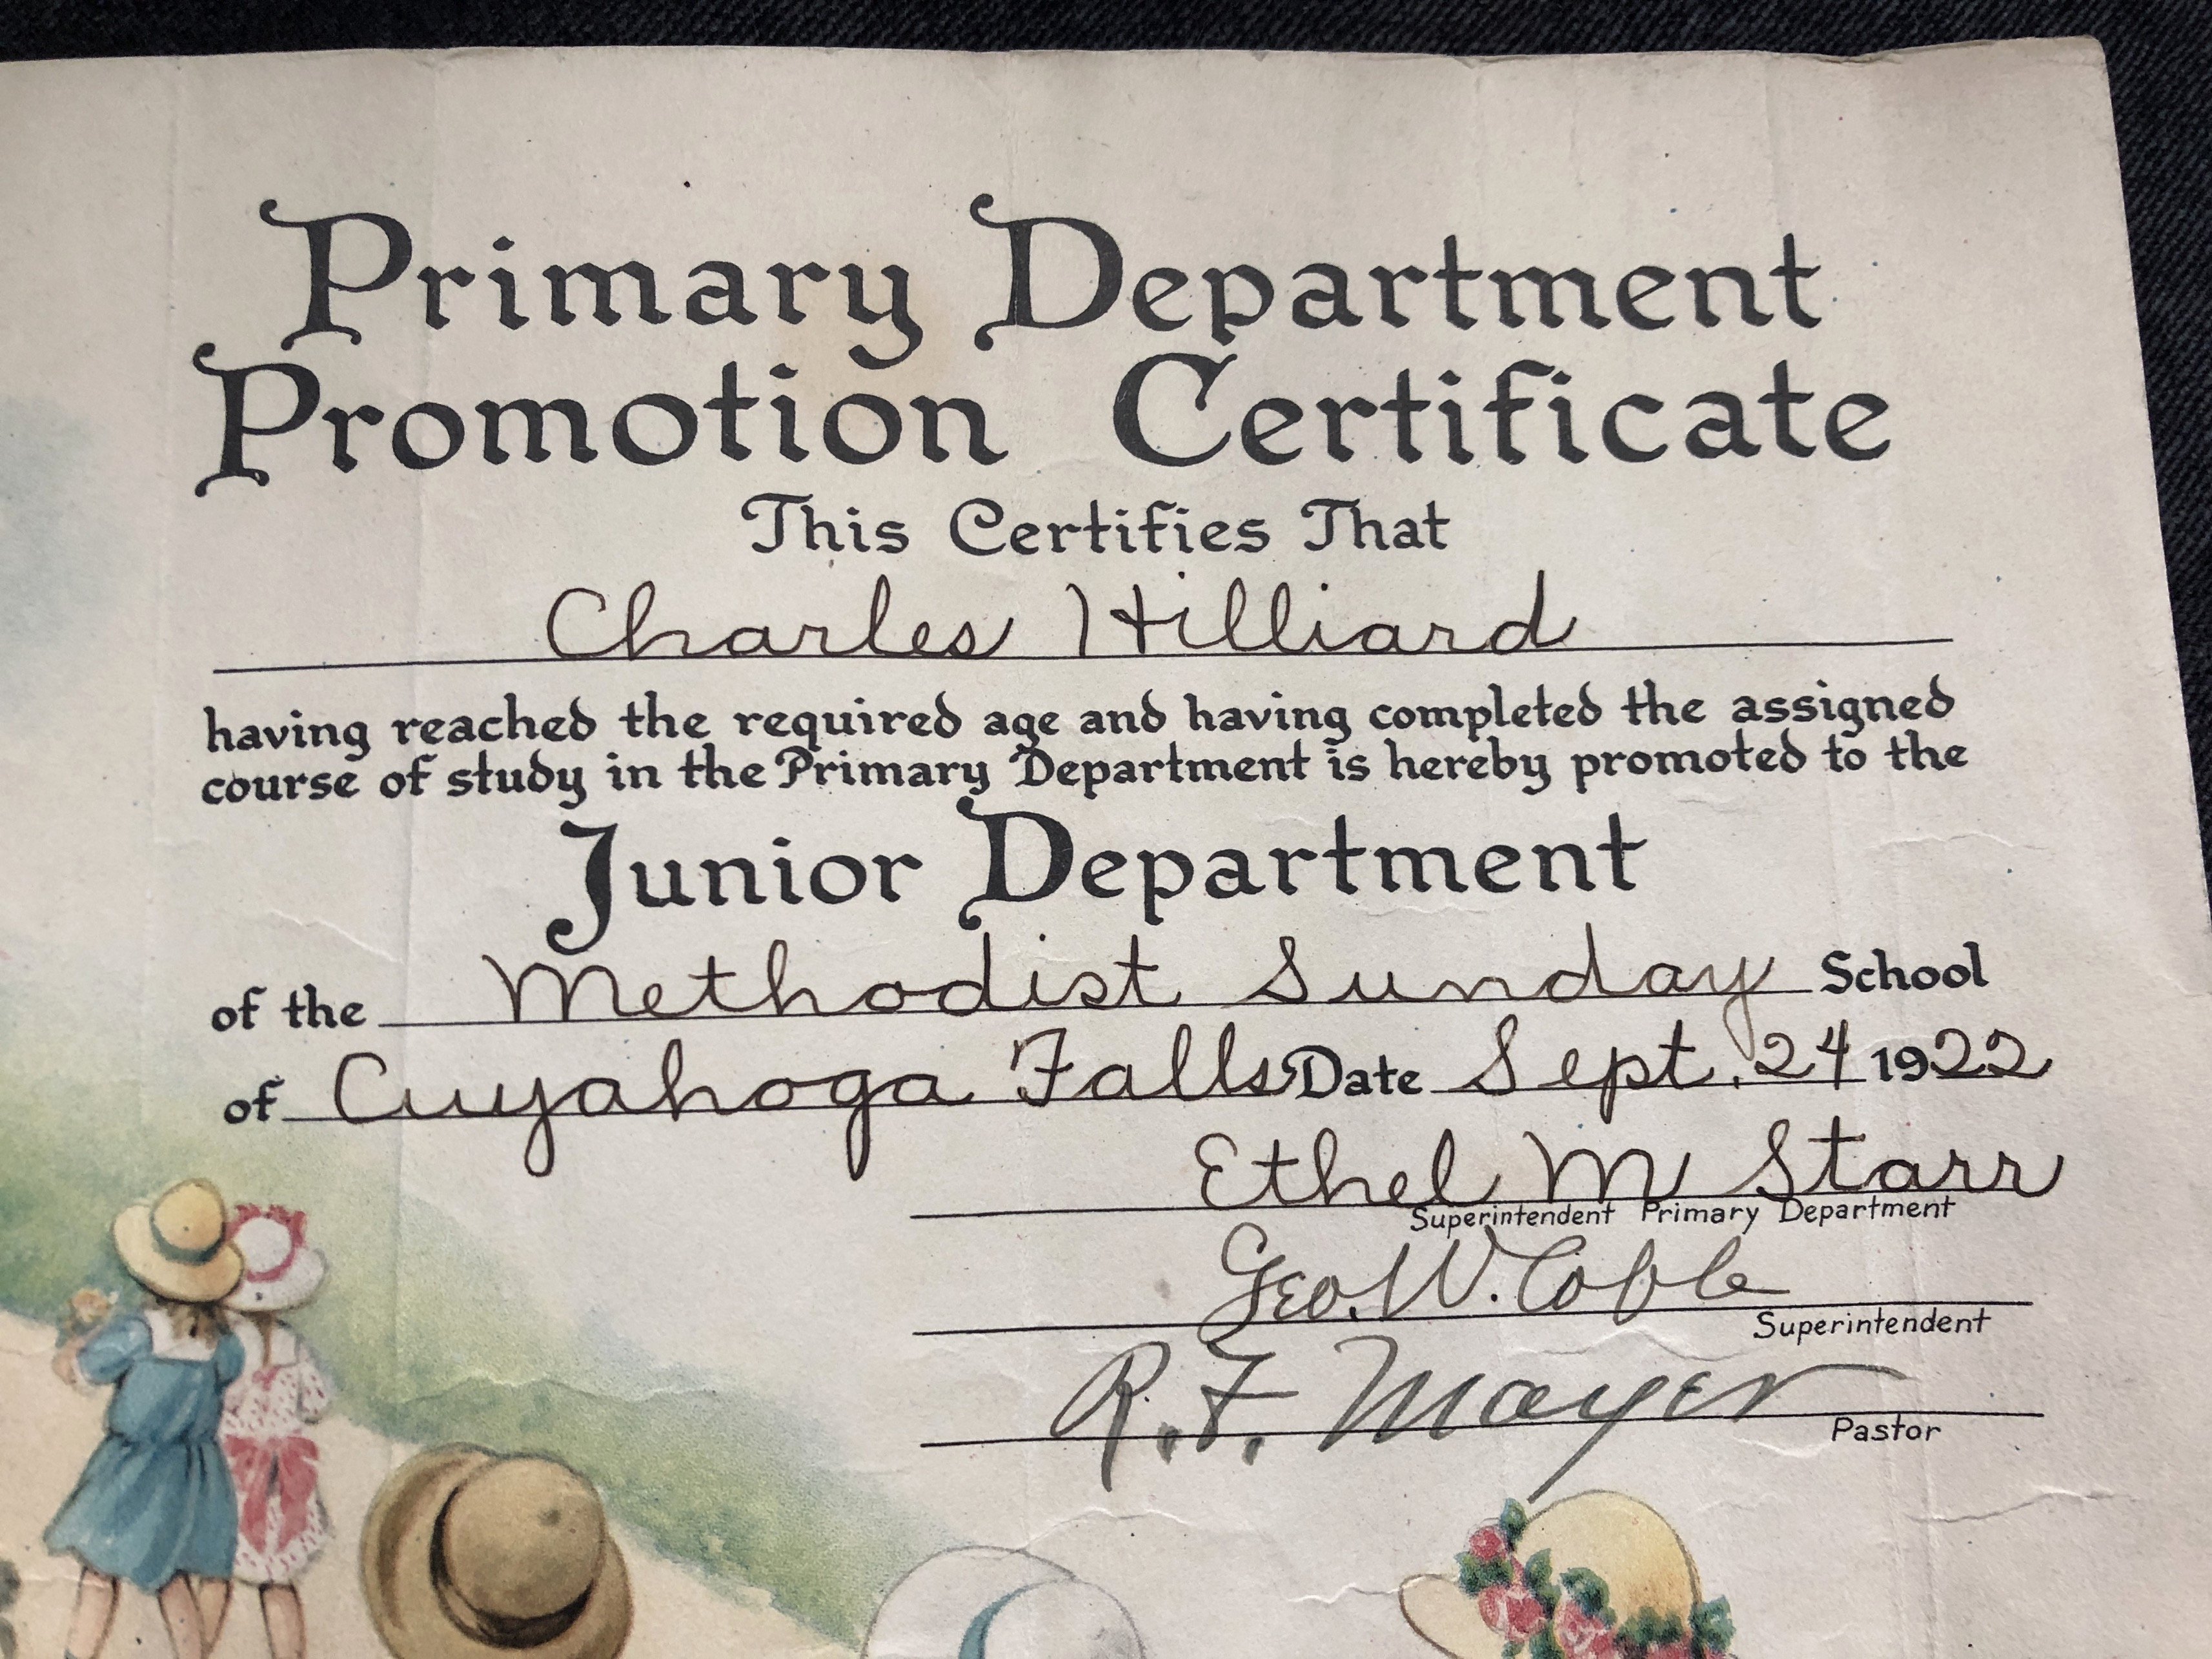 Sunday School Promotion Certificates New 1922 Primary Dept Promotion Certificate Charles Hilliard